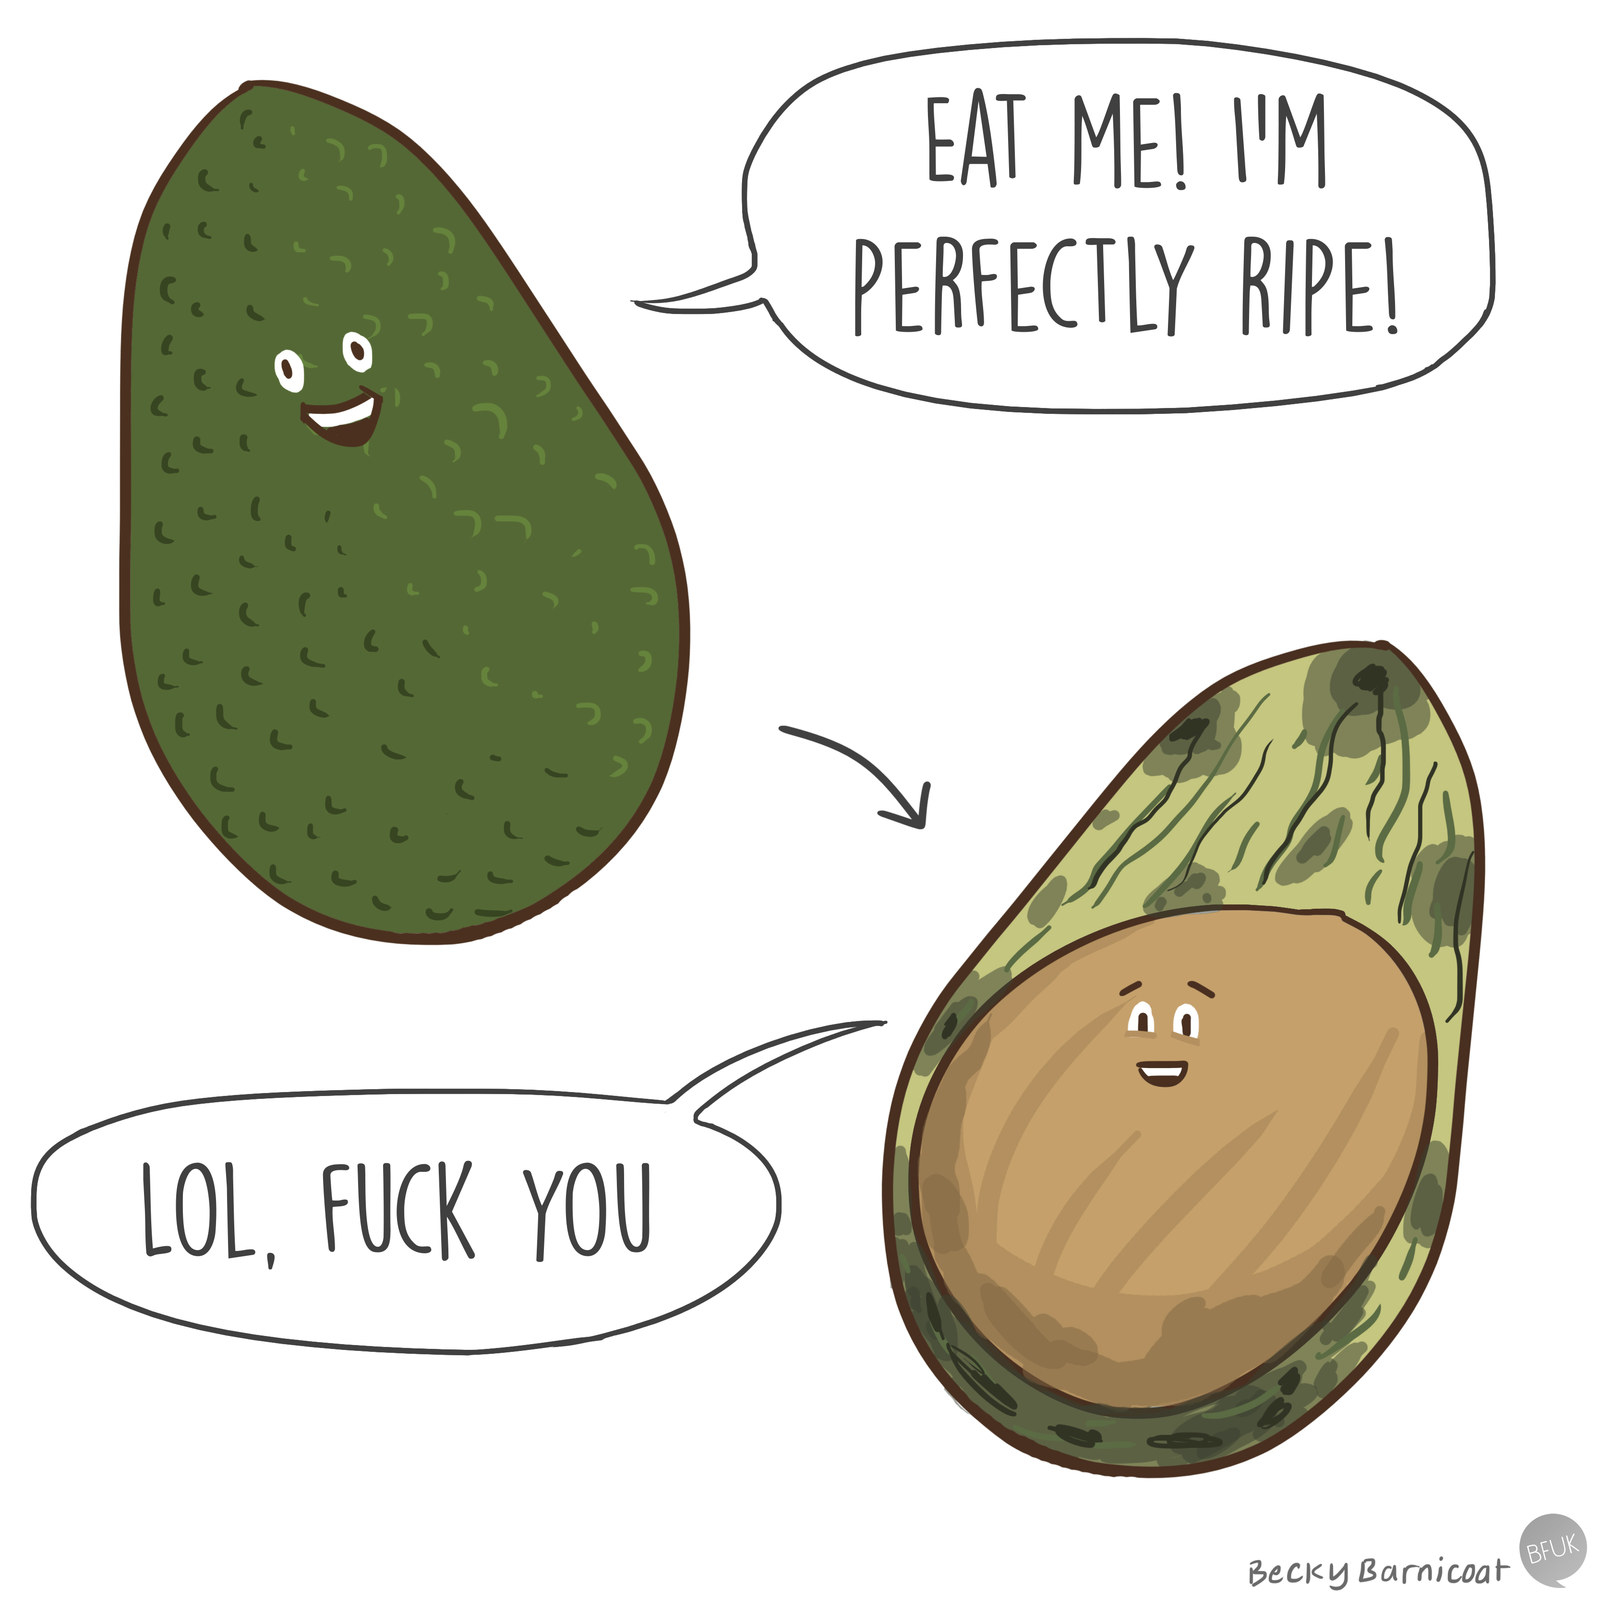 Getting played by avocados on the reg. 